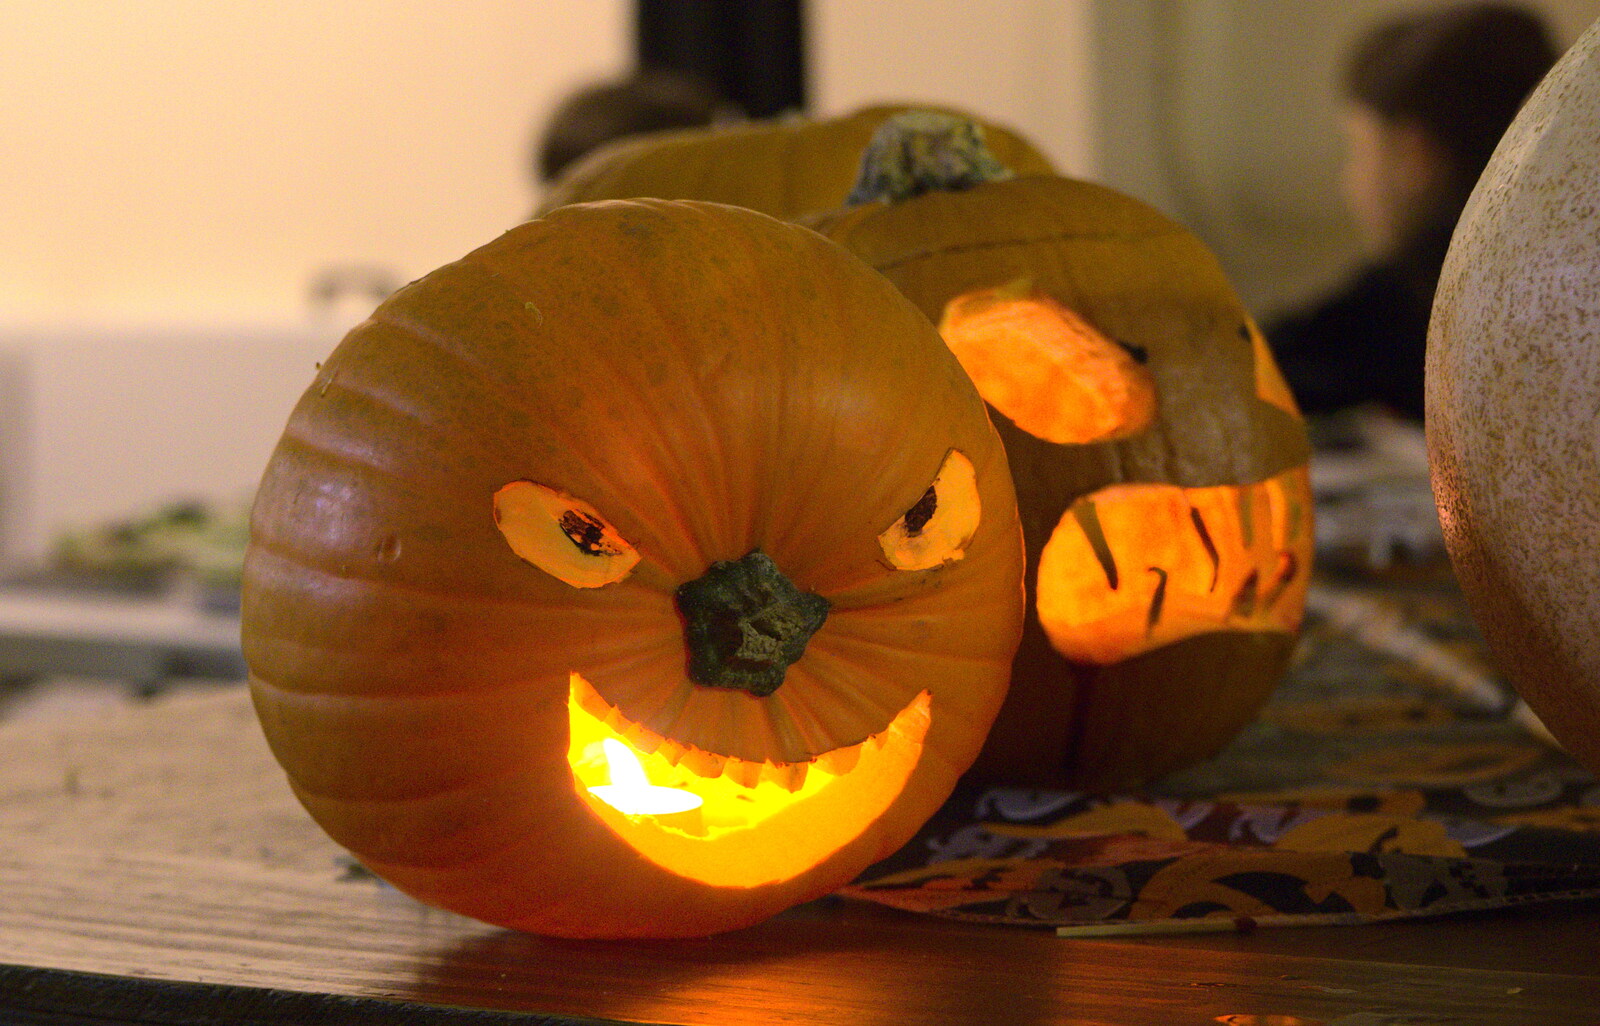 An evil-looking pumpkin from A Halloween Party at the Village Hall, Brome, Suffolk - 31st October 2014